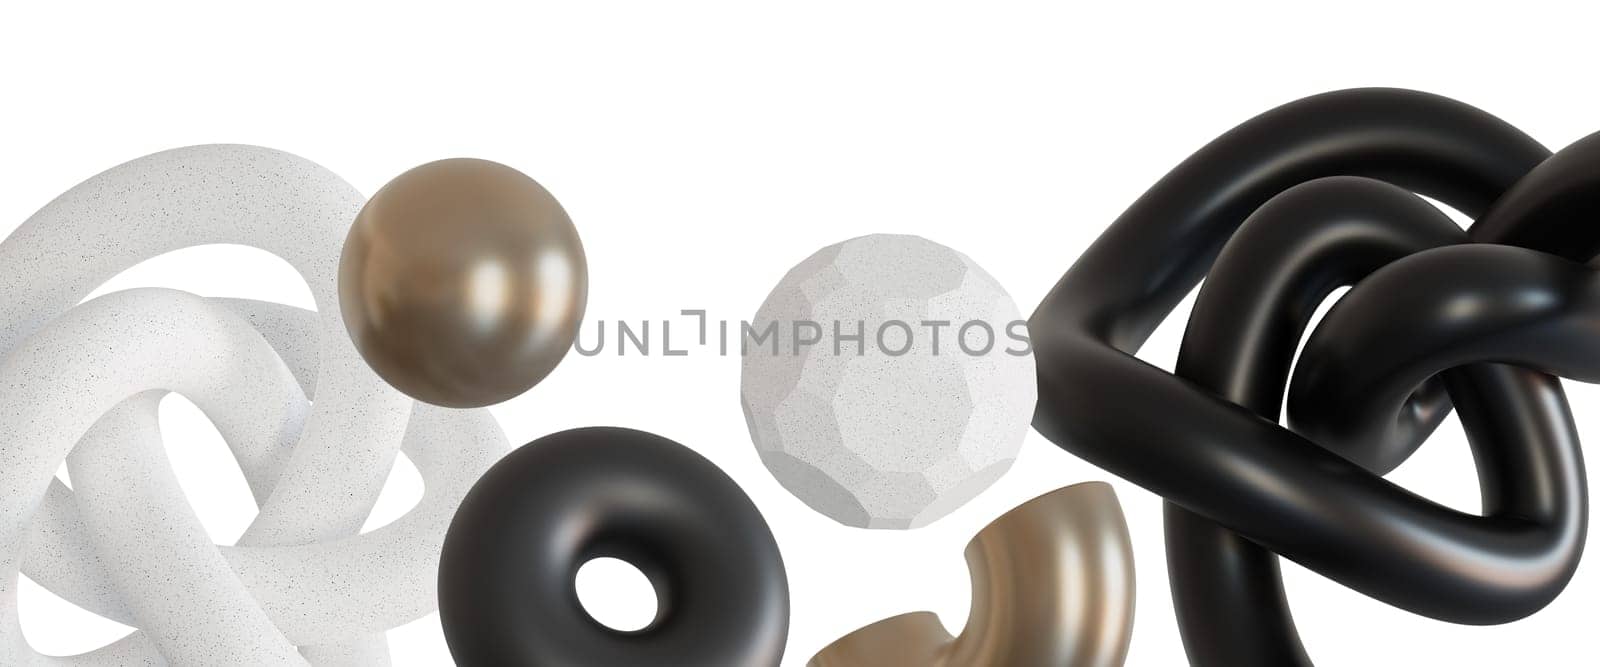 Elegant, minimalistic footer with abstract, floating black, white and metallic 3D shapes, isolated on white background. Modern border. Neutral tones. Bottom of the sheet. 3D render. by creativebird